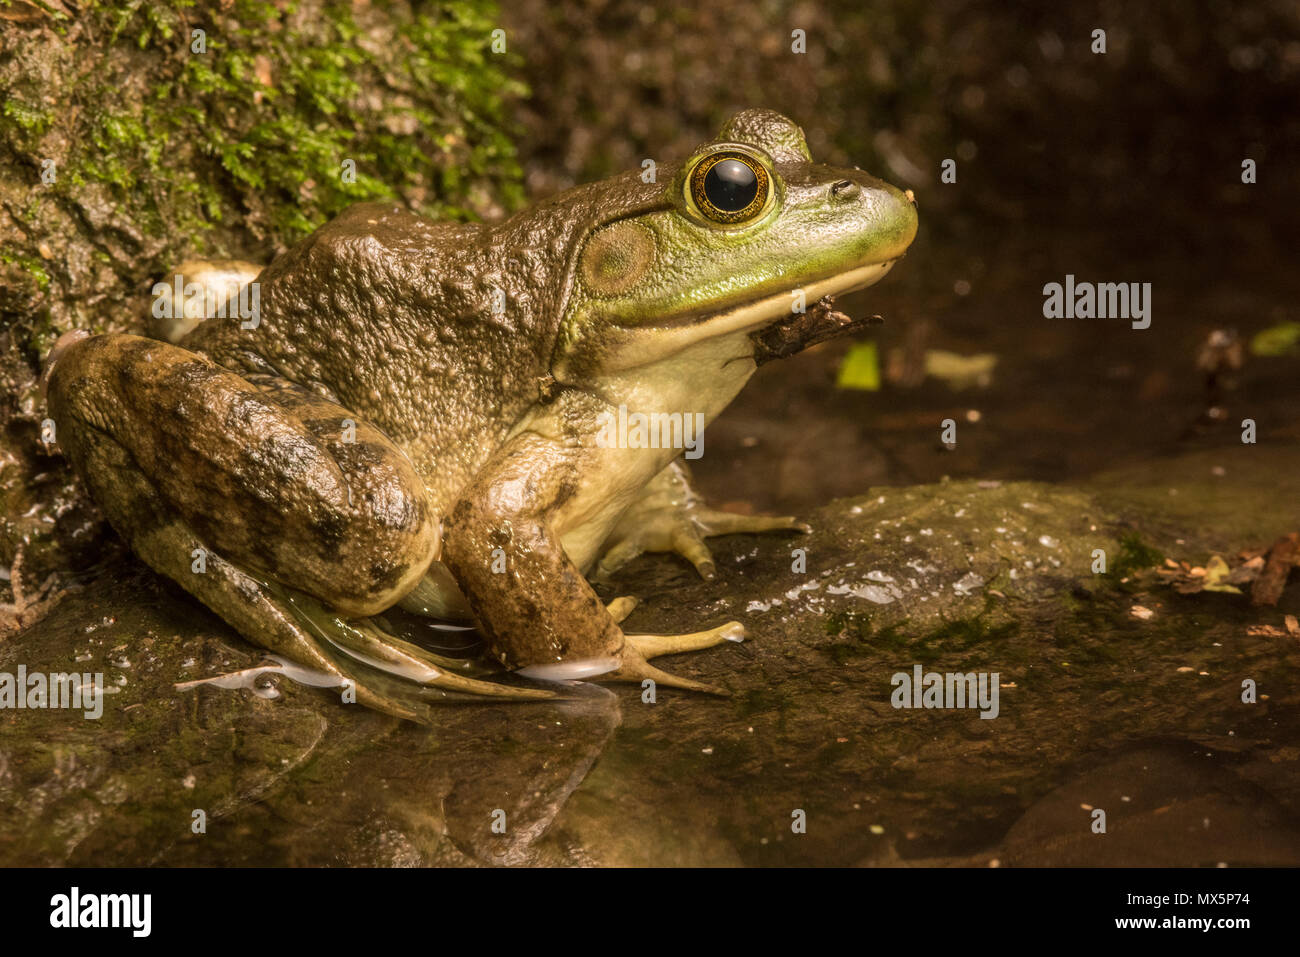 American bullfrog (Lithobates catesbeianus) sitting in a flooded forest at night, there are areas where they are invasive but NC is its native range. Stock Photo